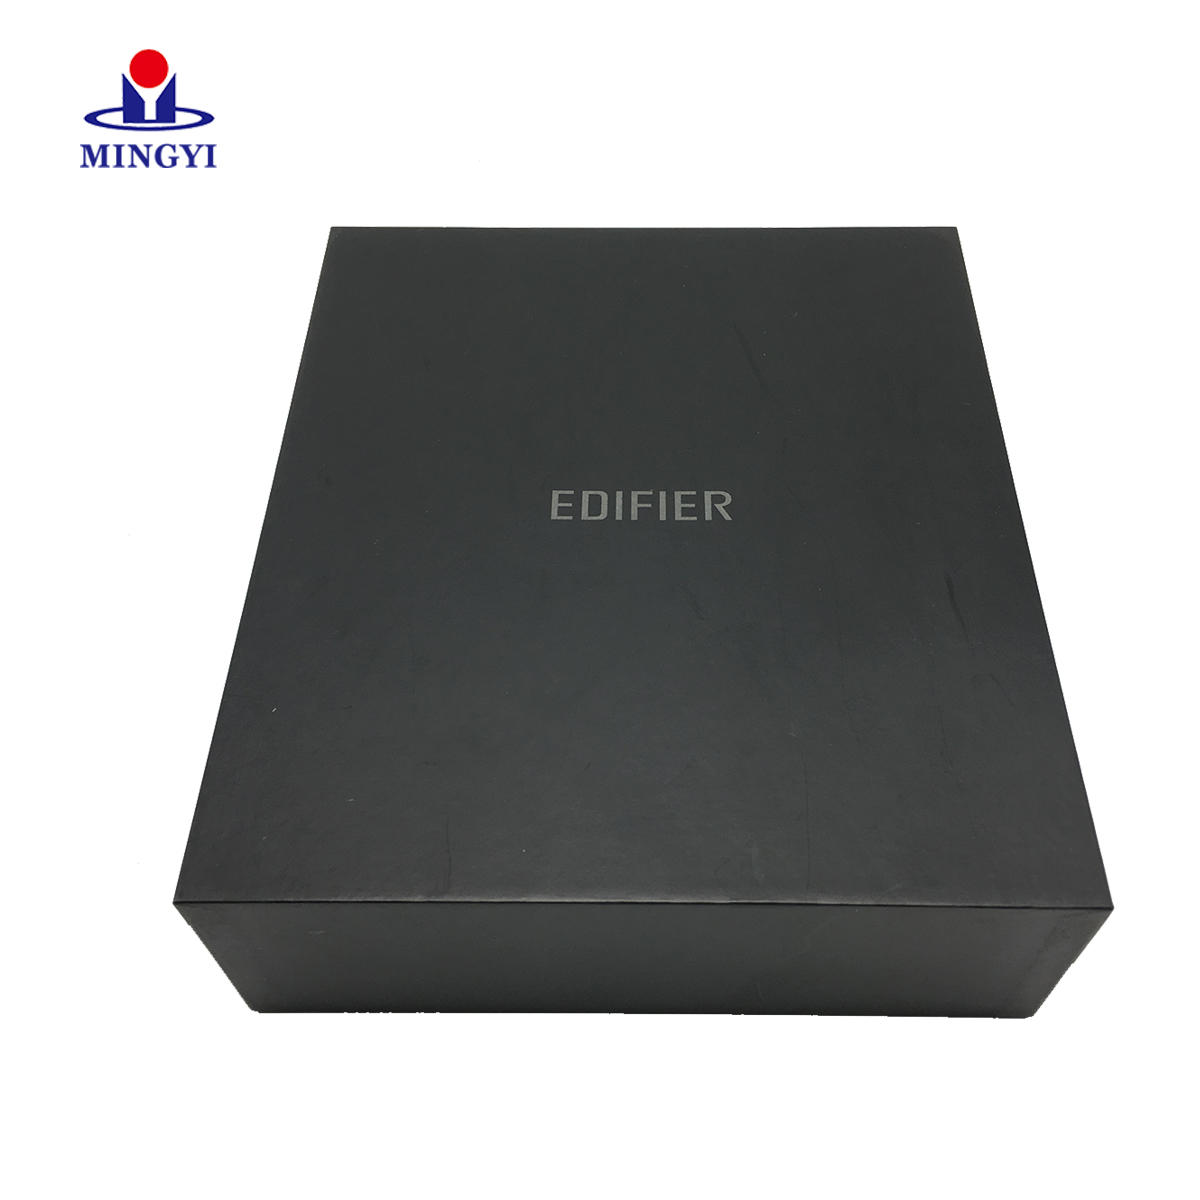 High quality structure digital product packaging headphone earphone headset packaging boxes paper packaging box with lid open